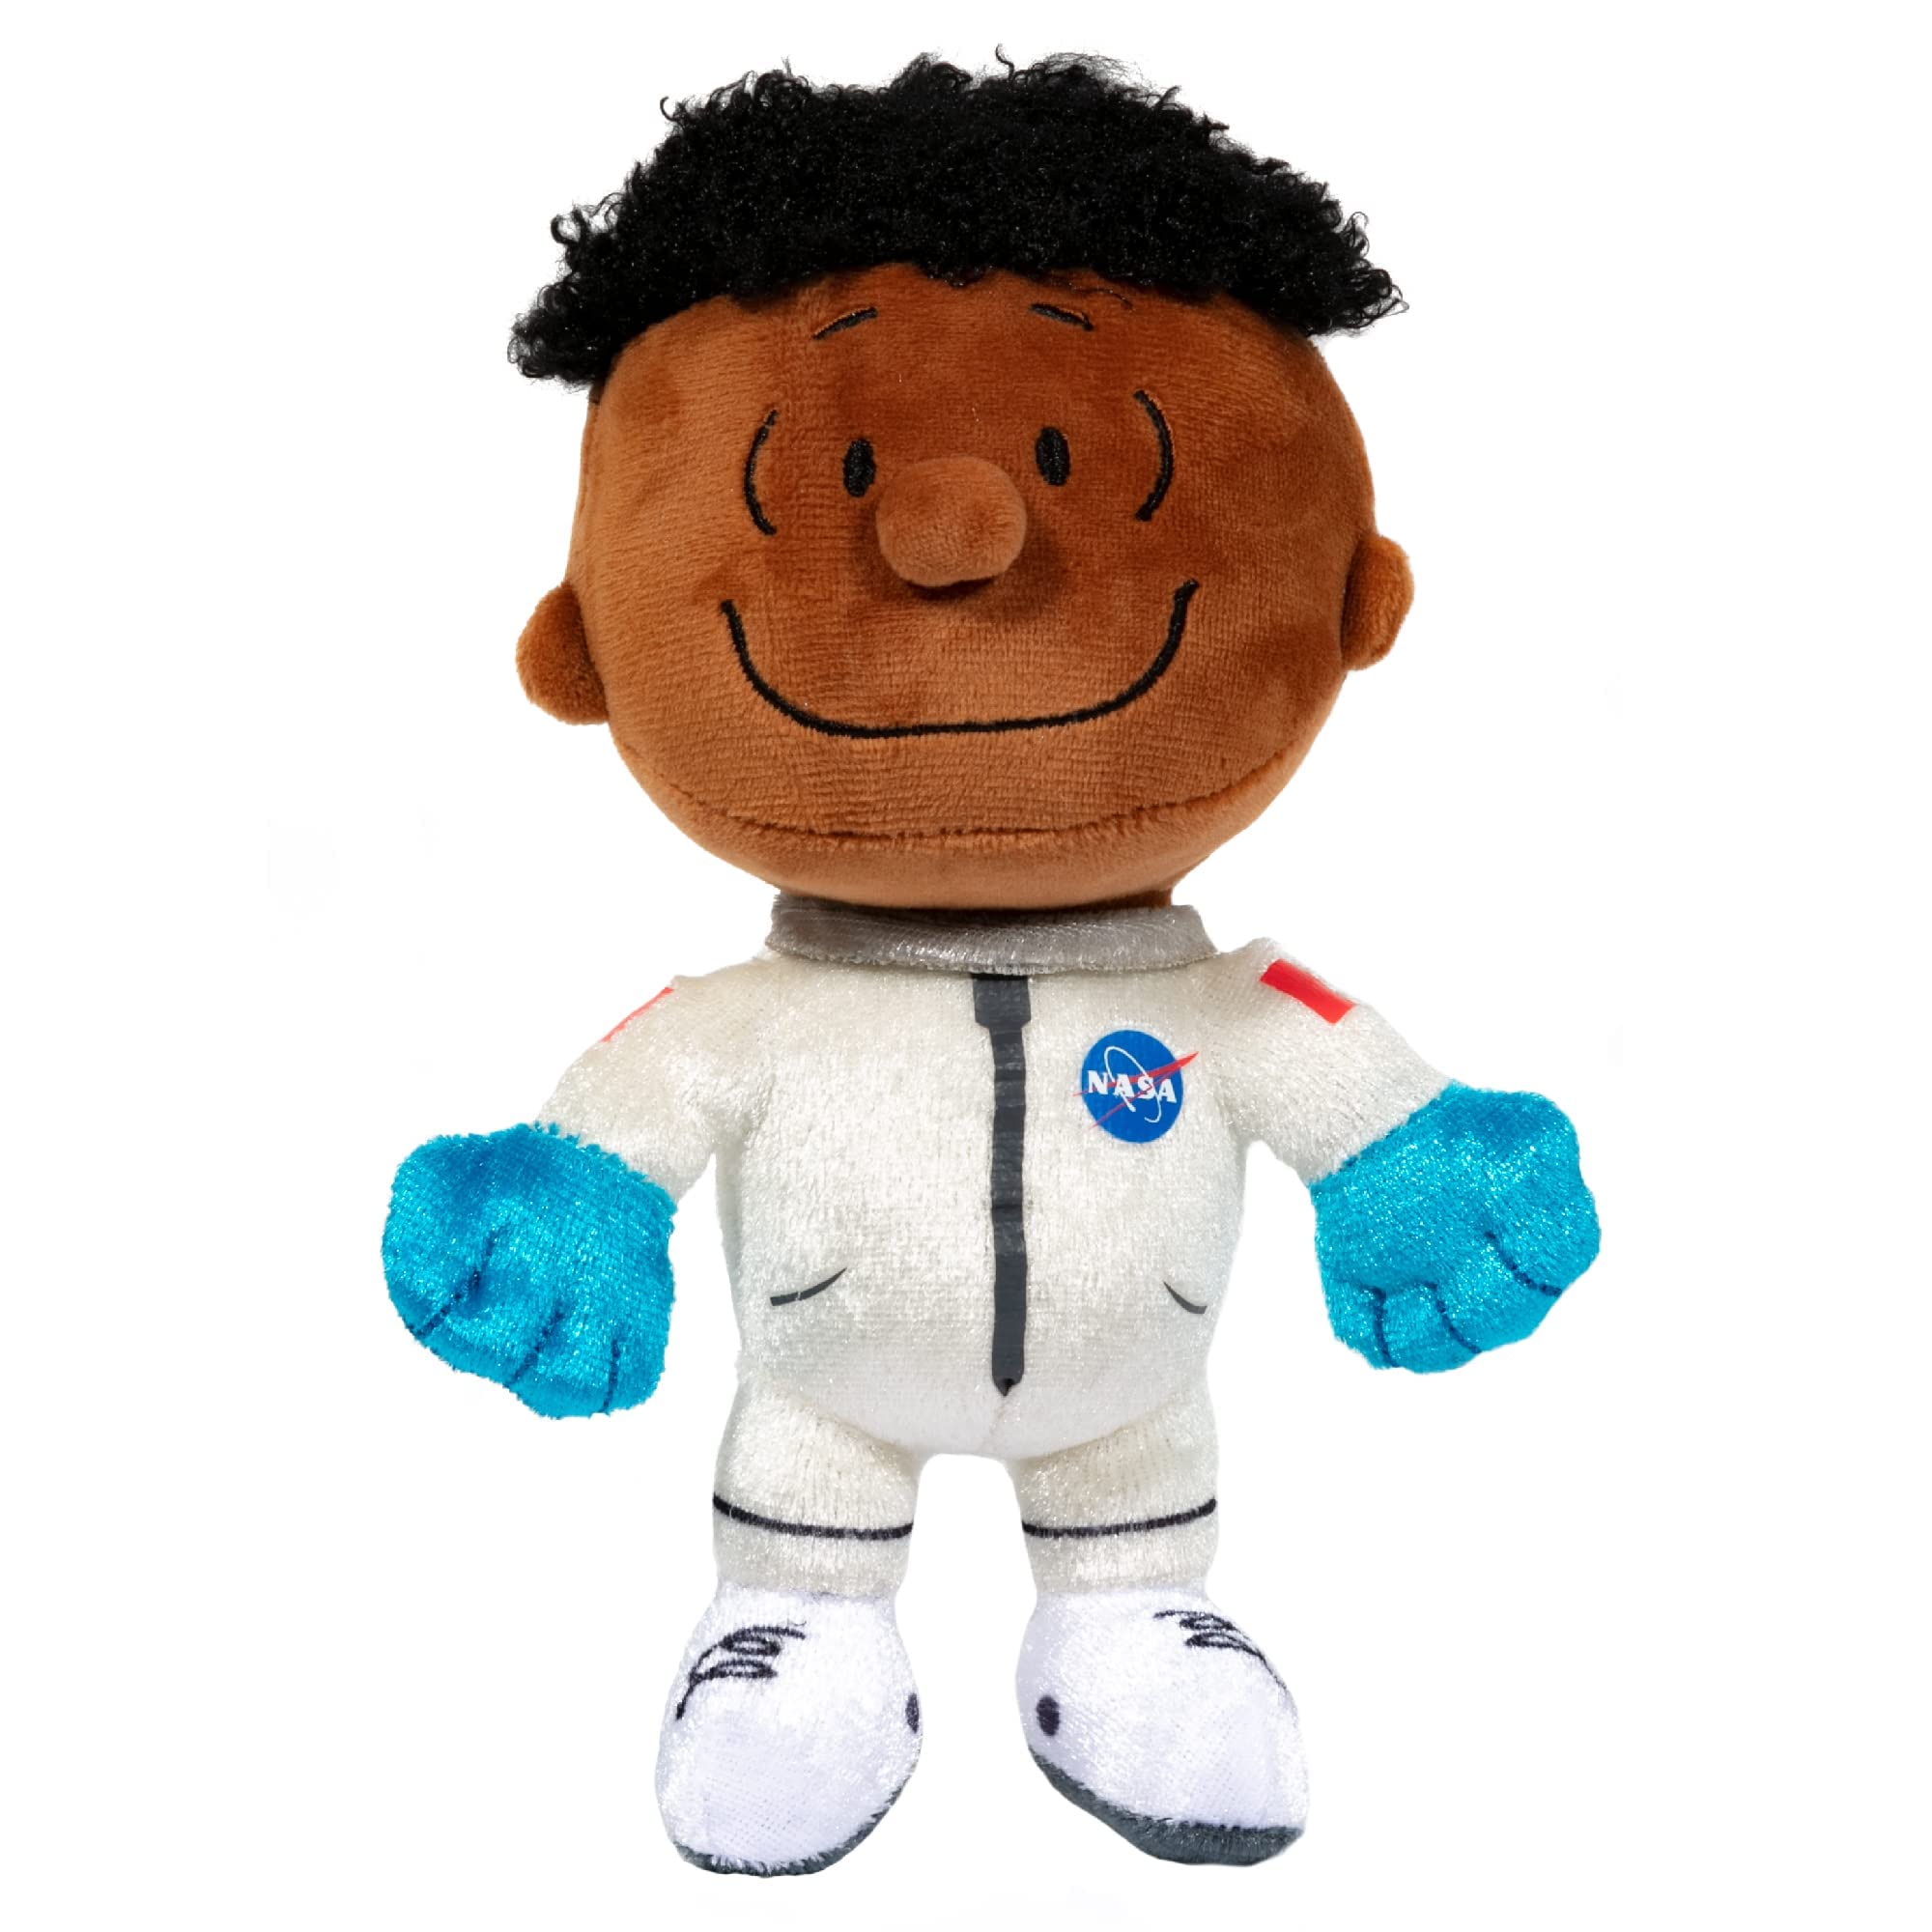 Jinx Official Peanuts Collectible Plush Franklin, Excellent Plushie Toy for Toddlers & Preschool, White NASA Astronaut, Snoopy Team